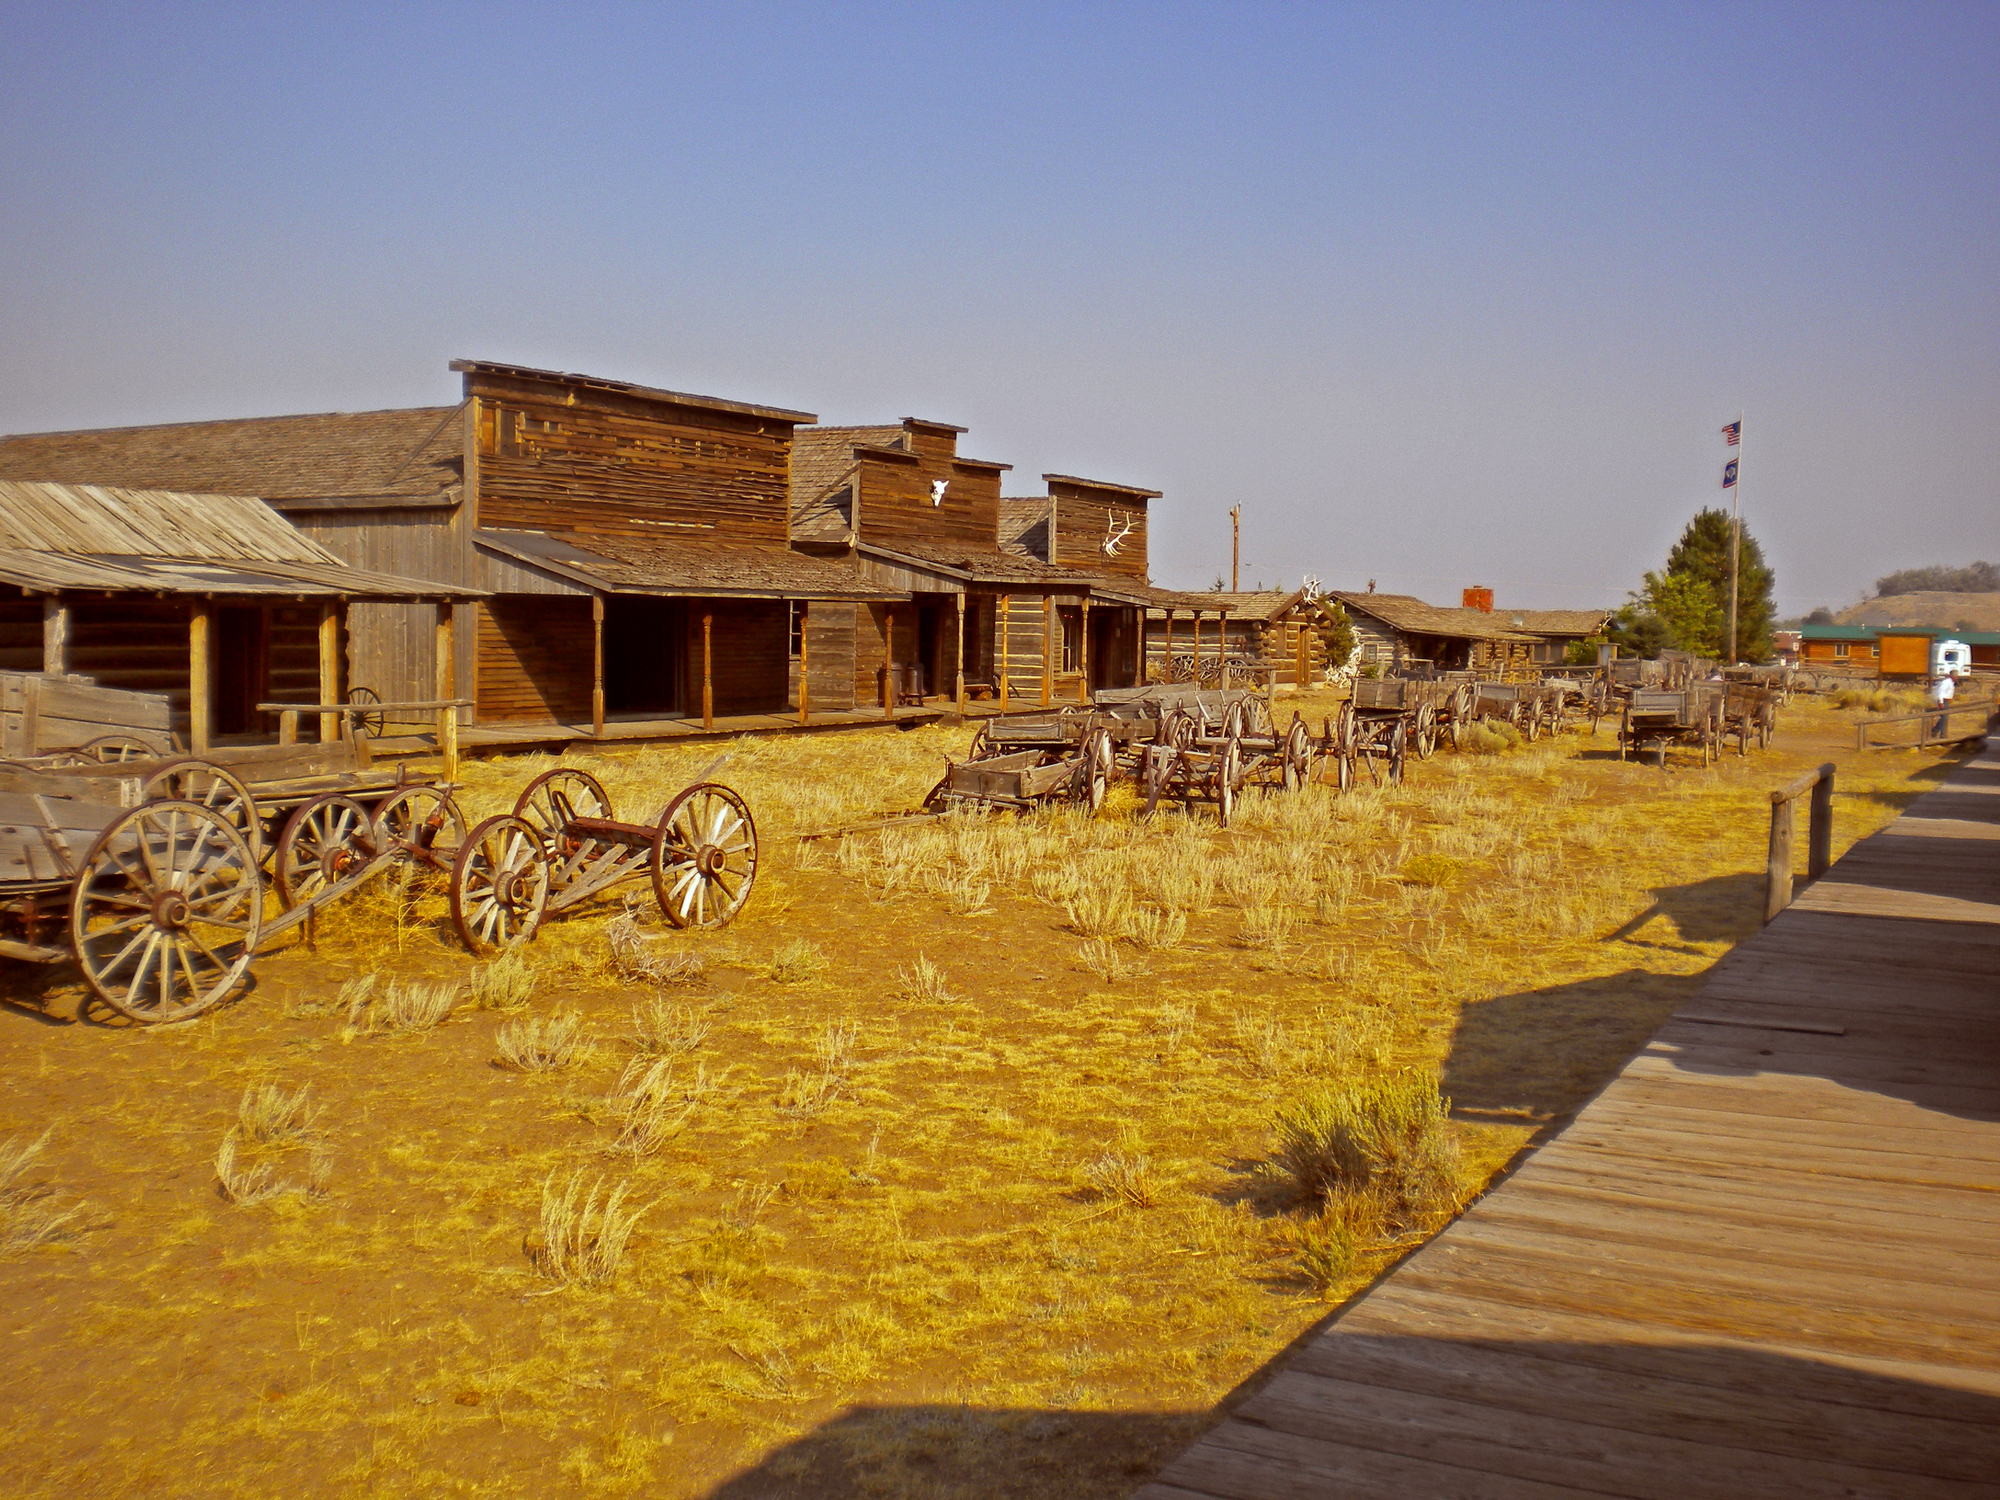 A deserted dirt street in an Old West ghost town.